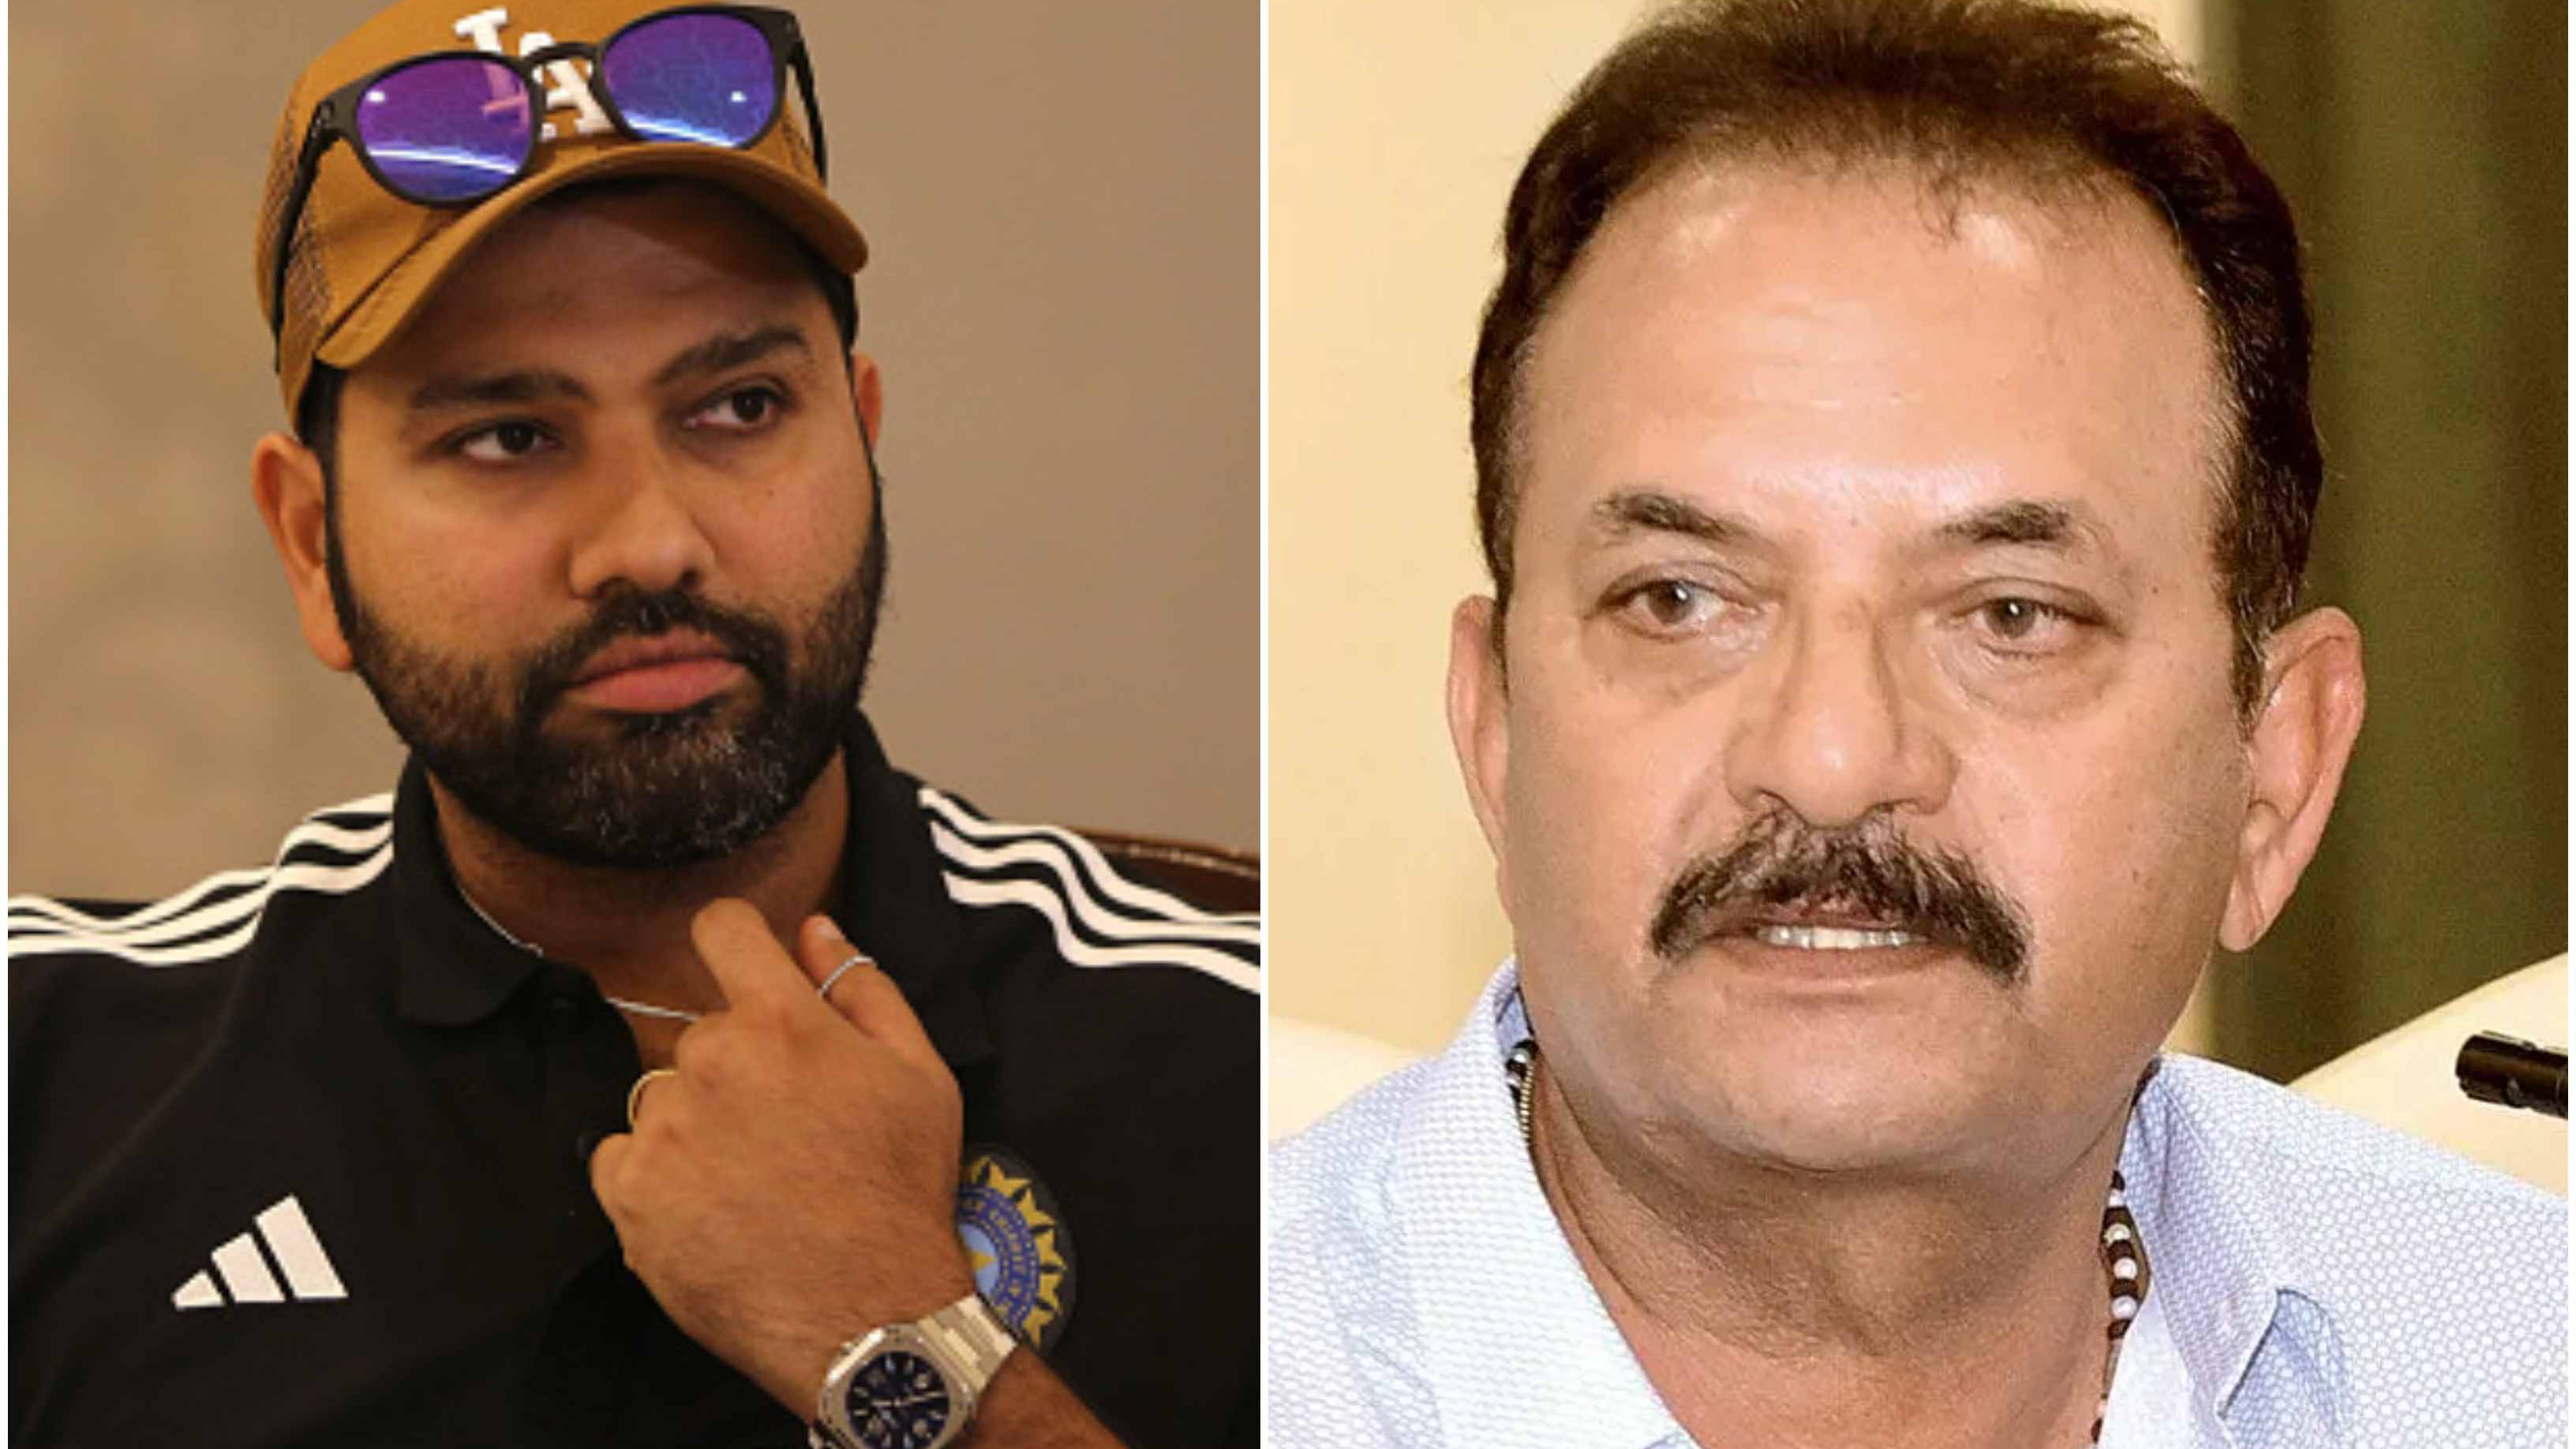 “No one will gain confidence,” Madan Lal disagrees with Rohit Sharma’s flexible middle order theory